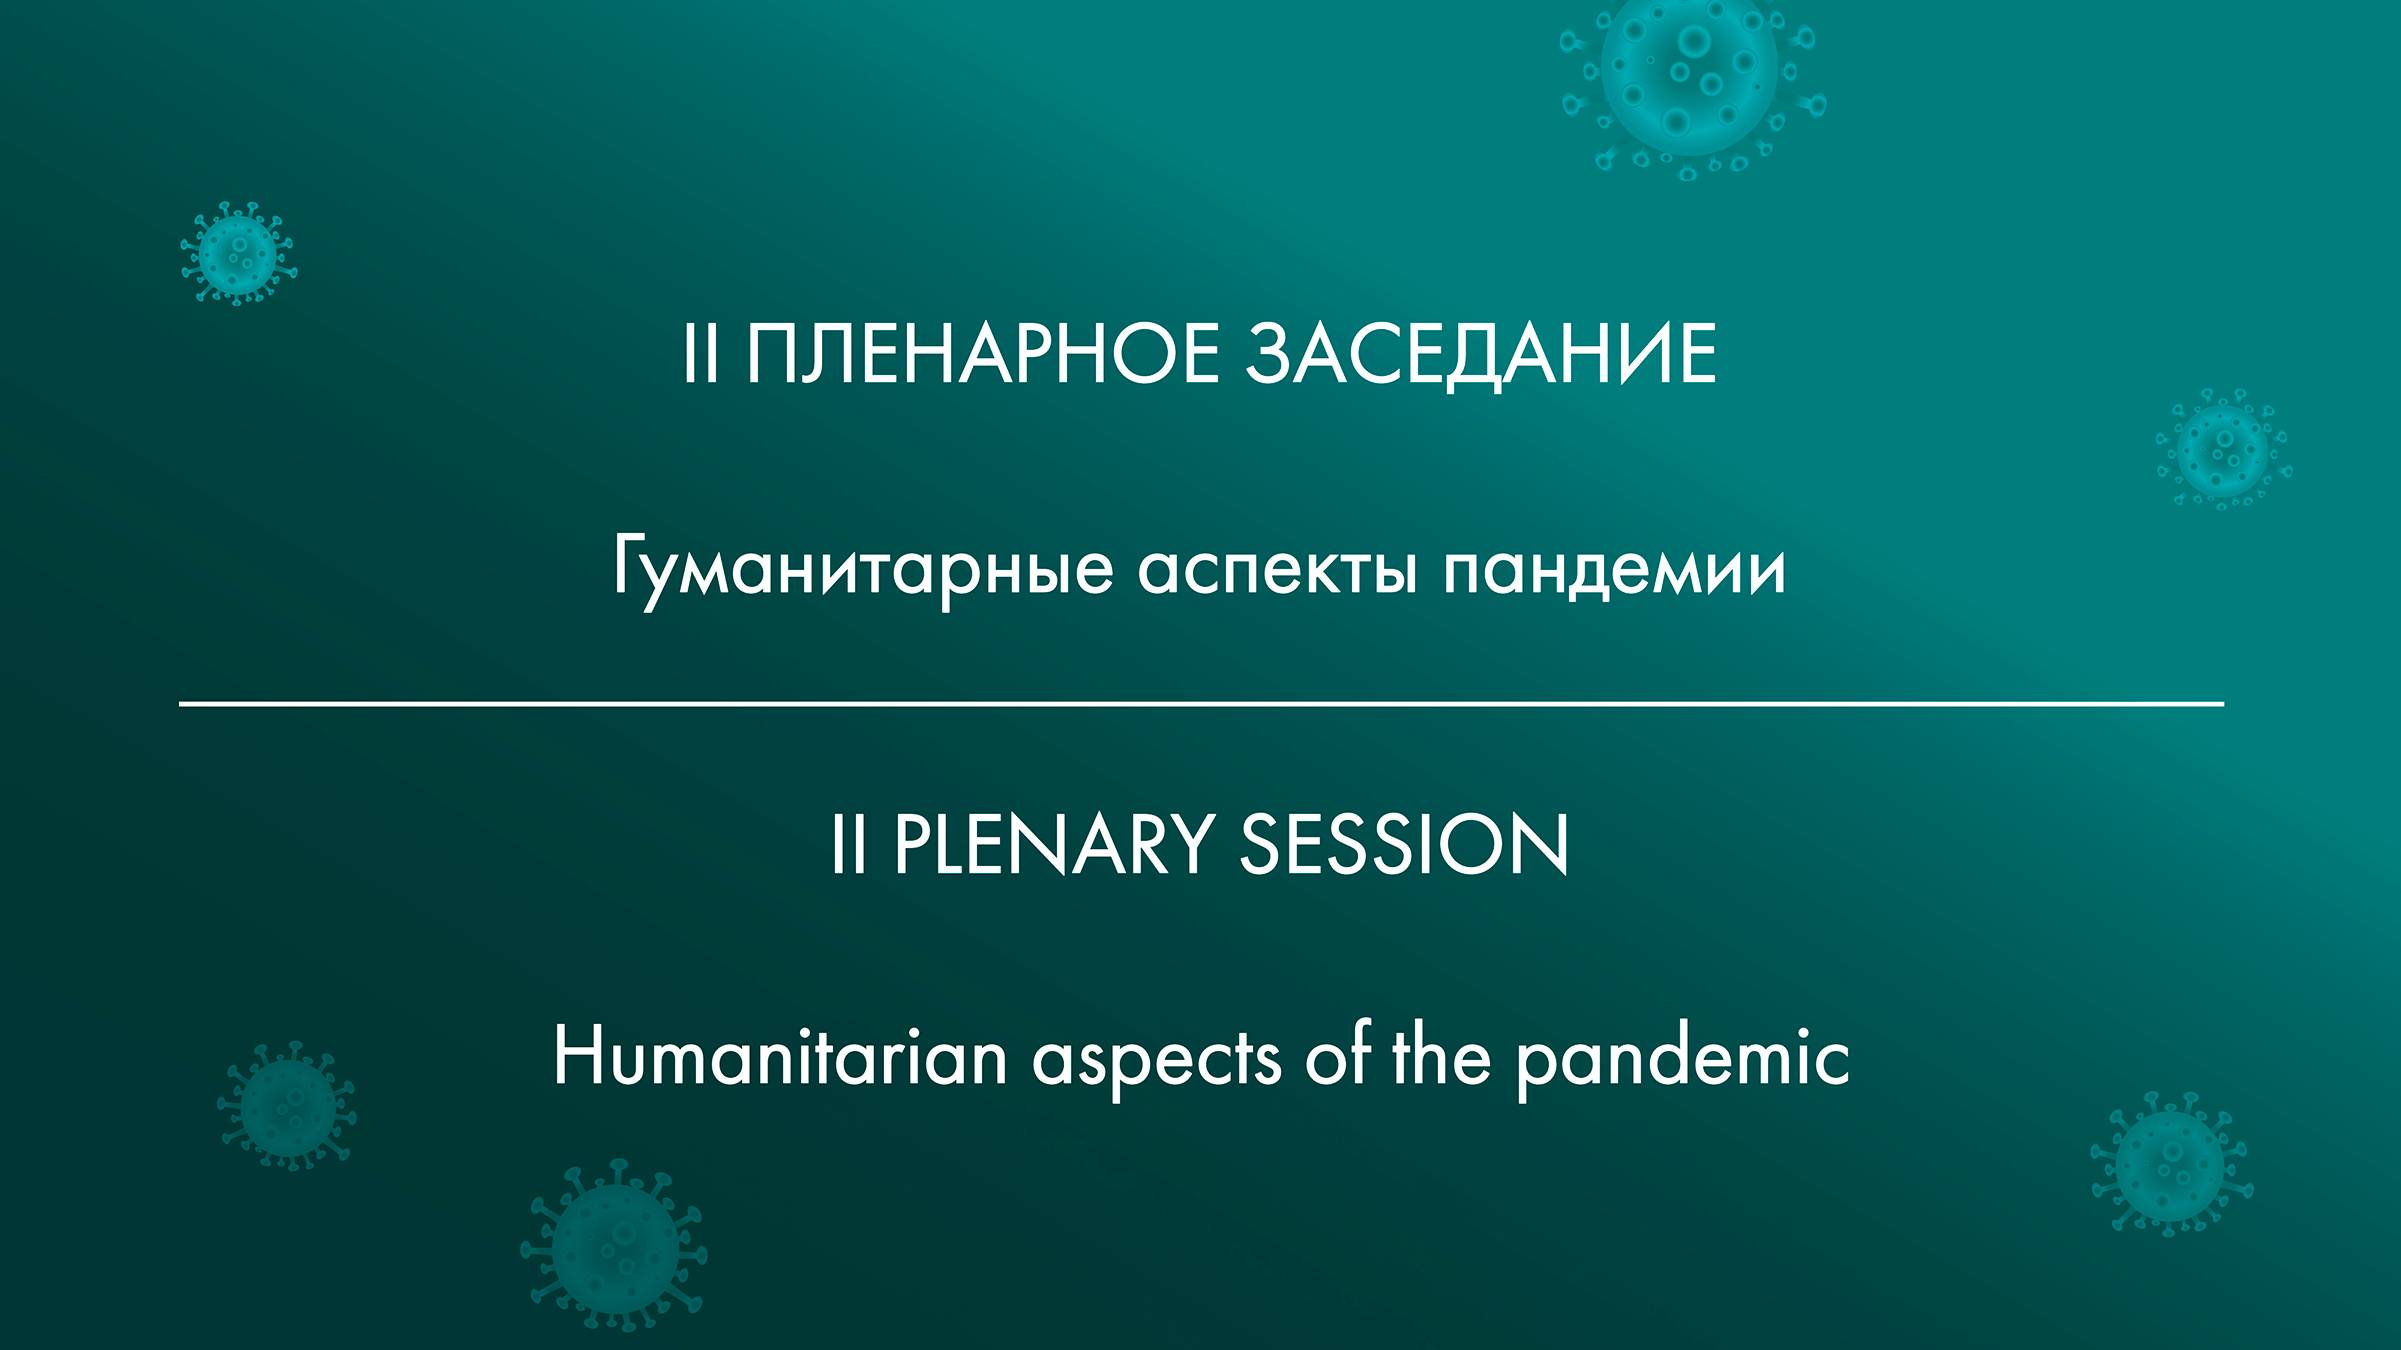 II PLENARY SESSION Humanitarian aspects of the pandemic